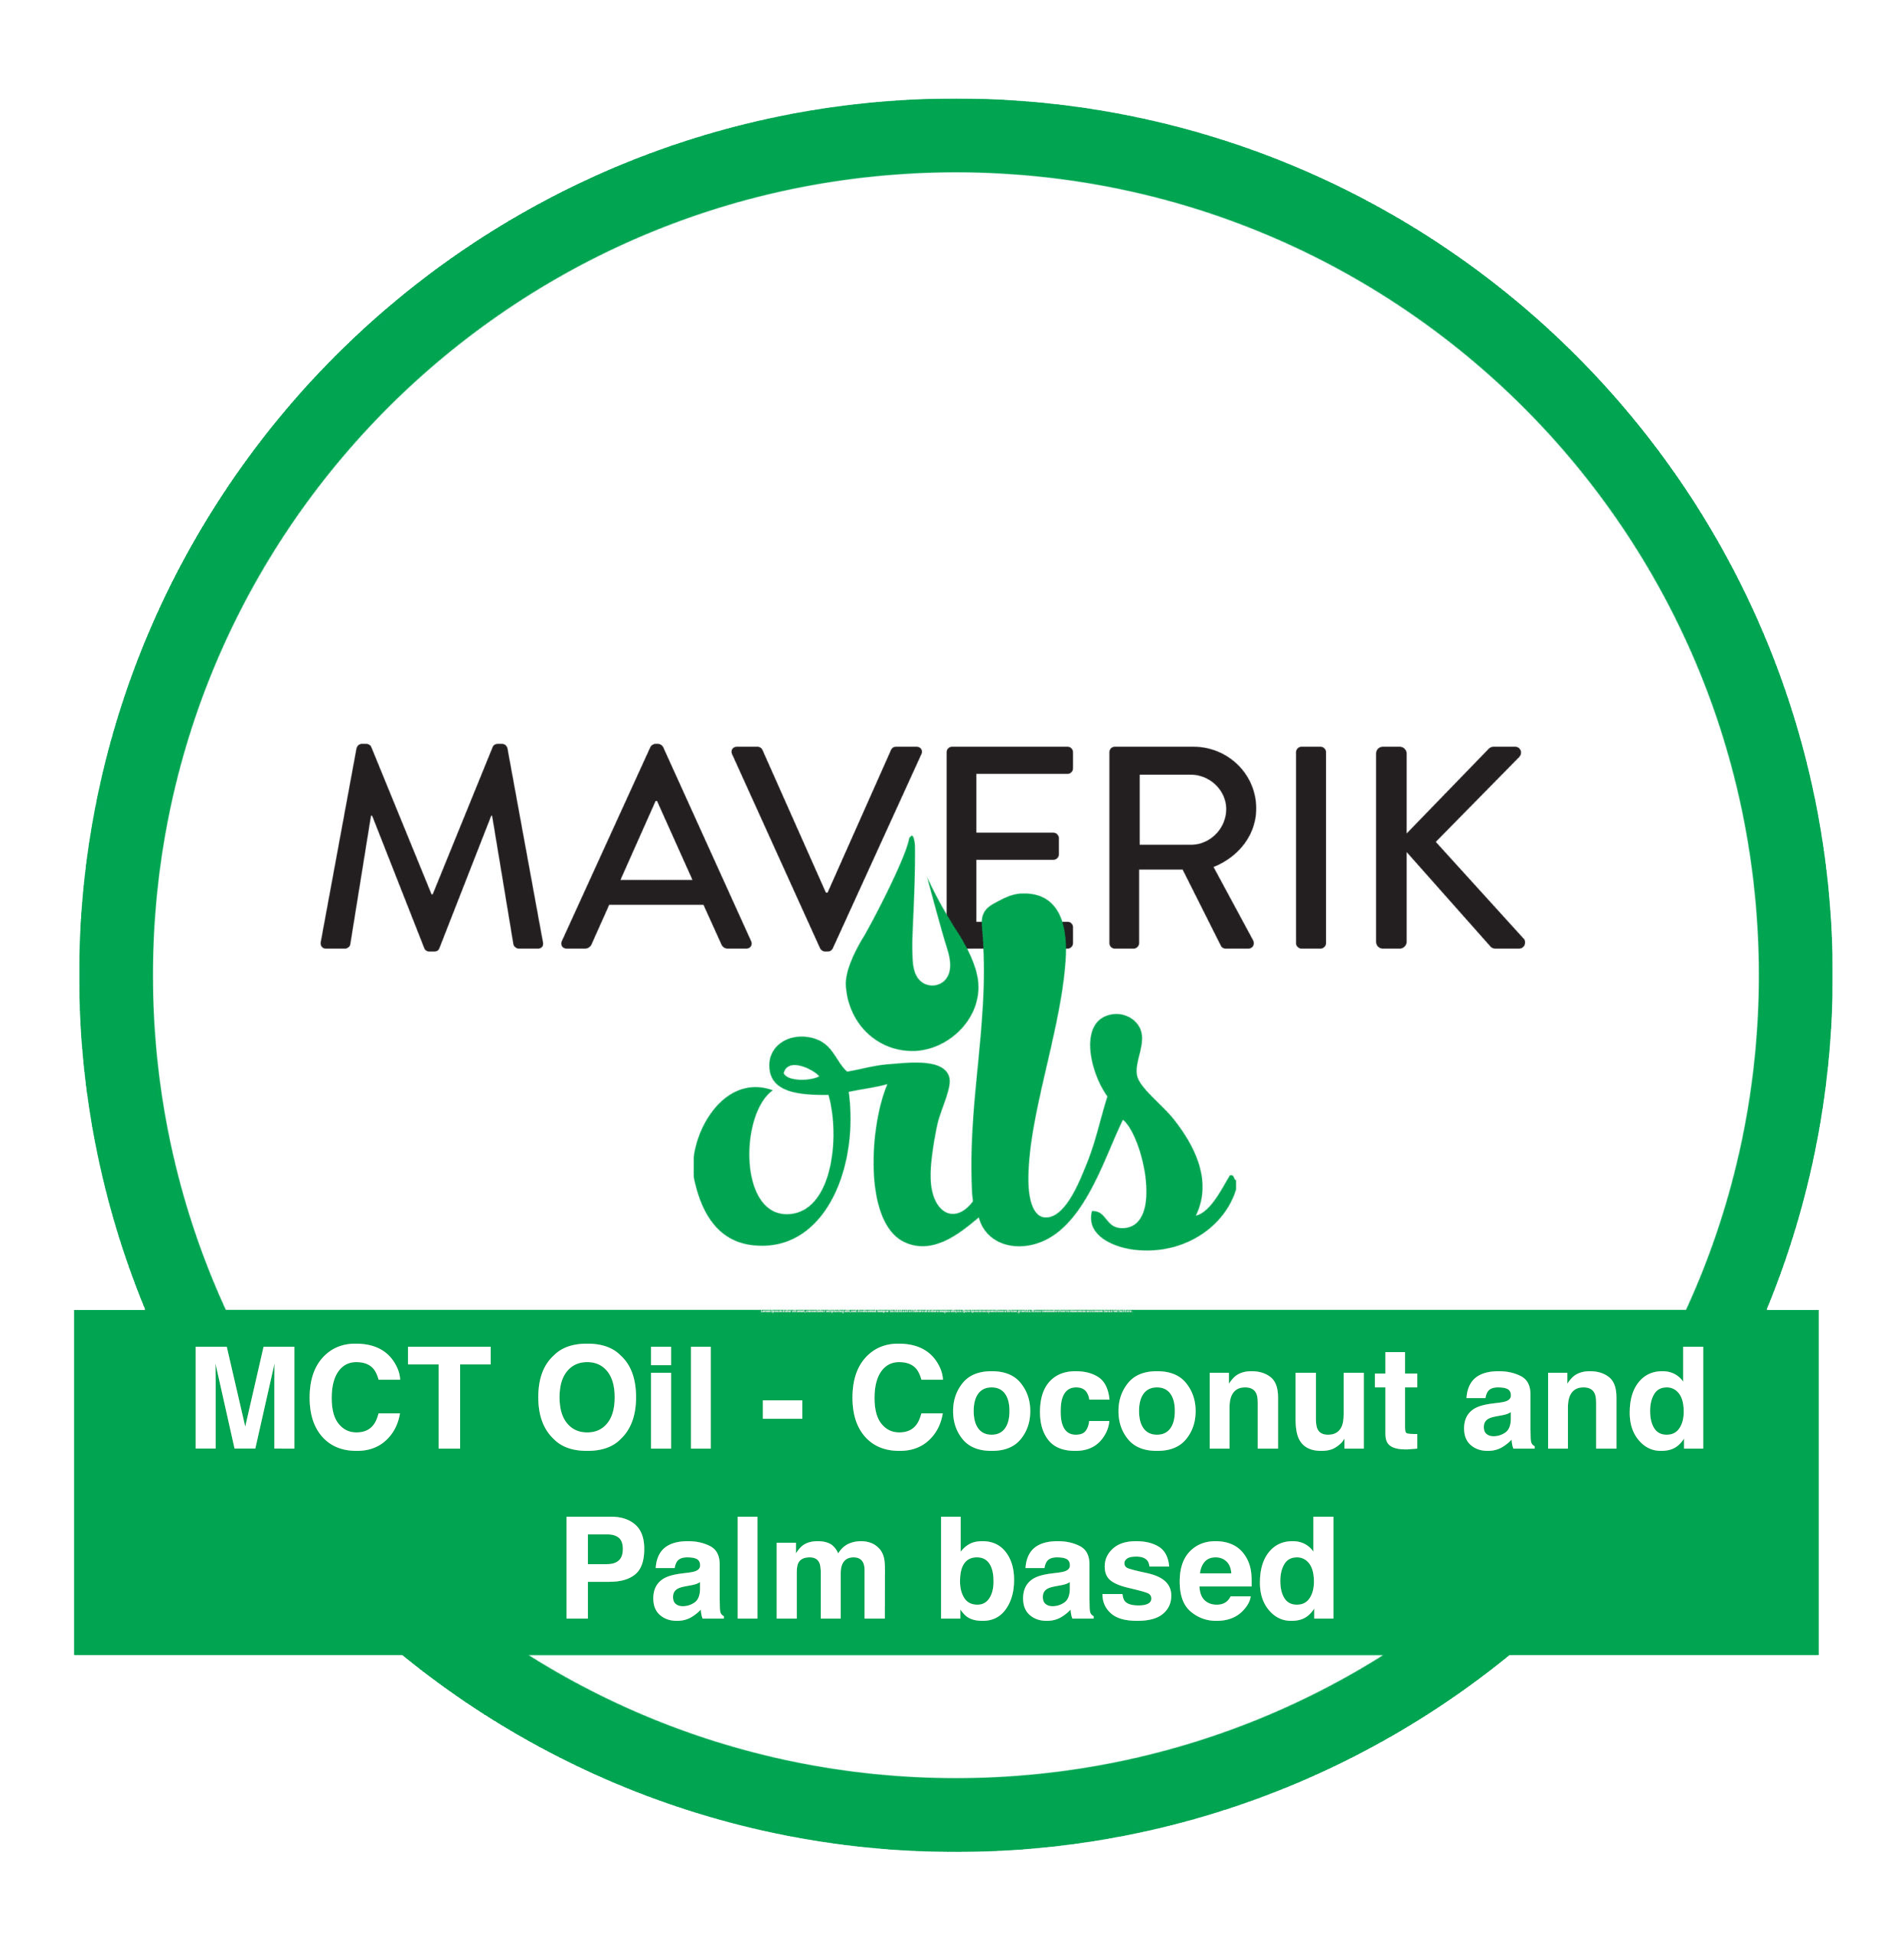 MCT Oil – Coconut and Palm based